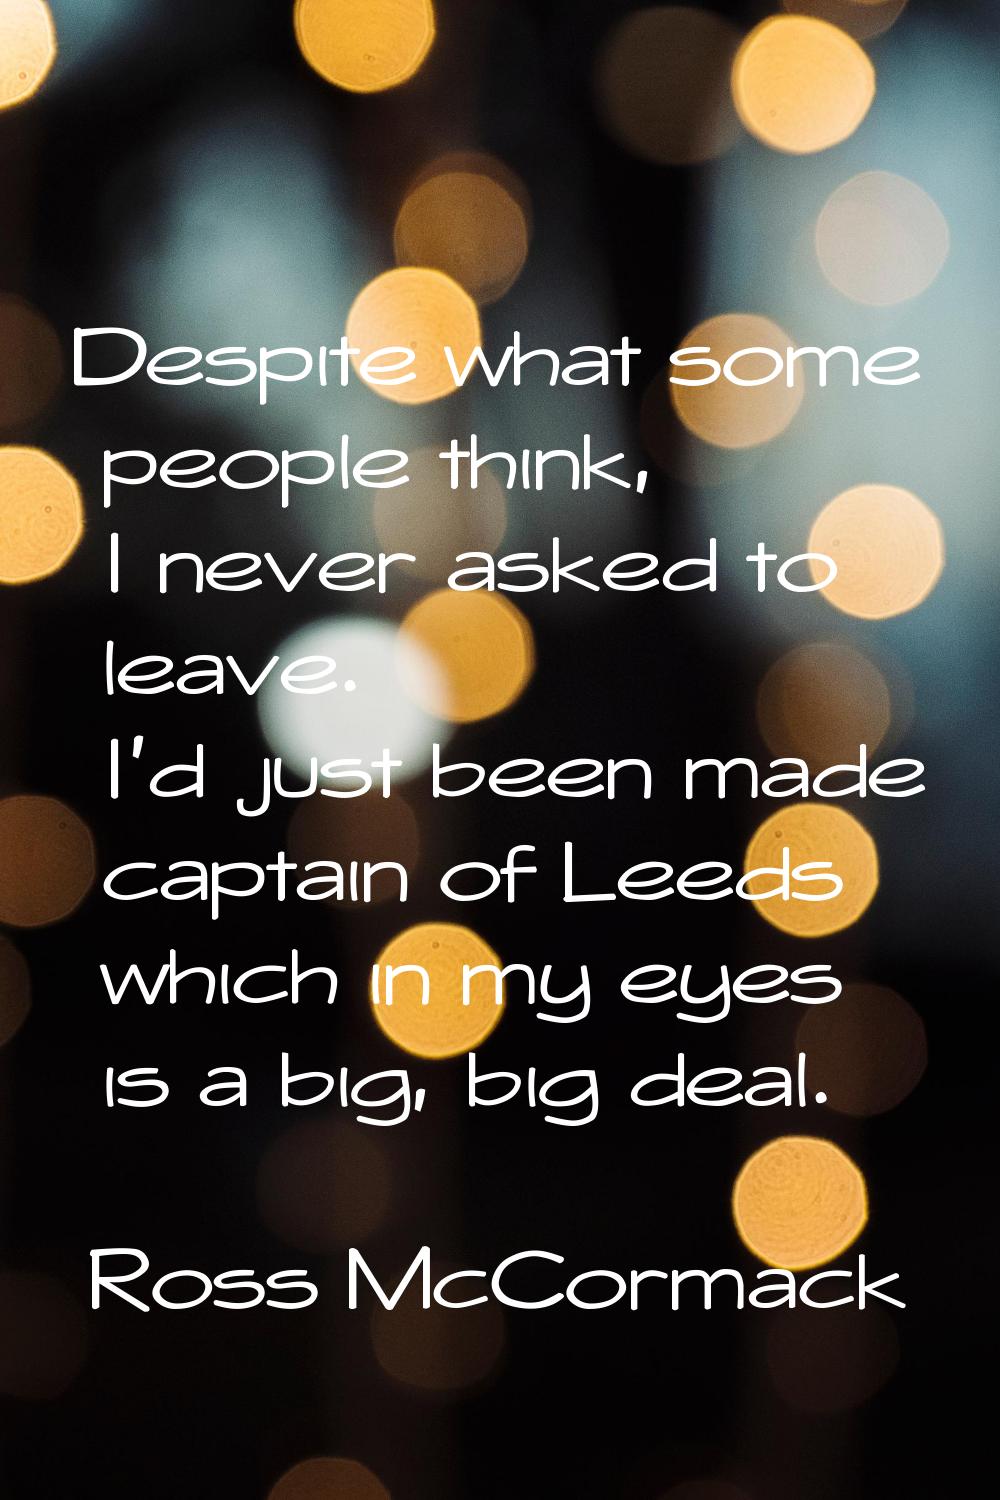 Despite what some people think, I never asked to leave. I'd just been made captain of Leeds which i